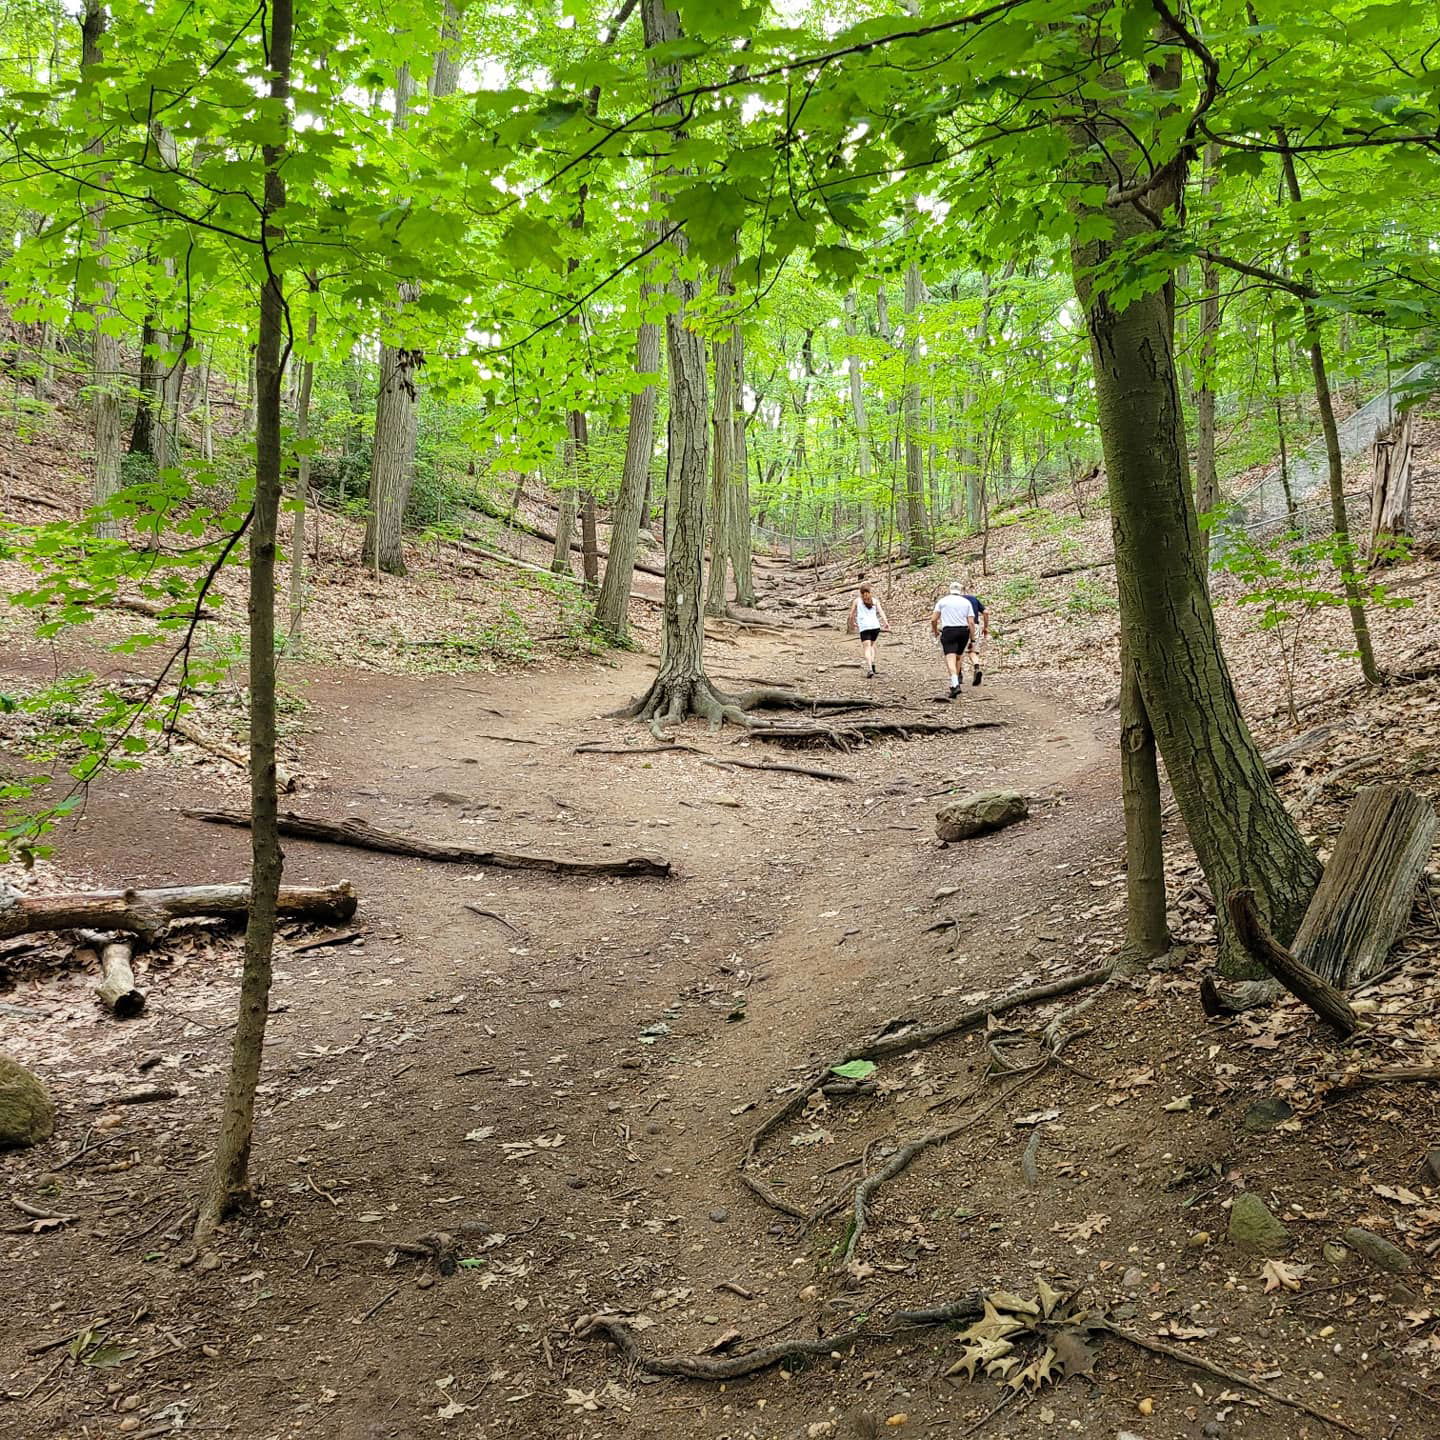 Cold Spring Harbor State Park Hiking Trail - 6/26/21